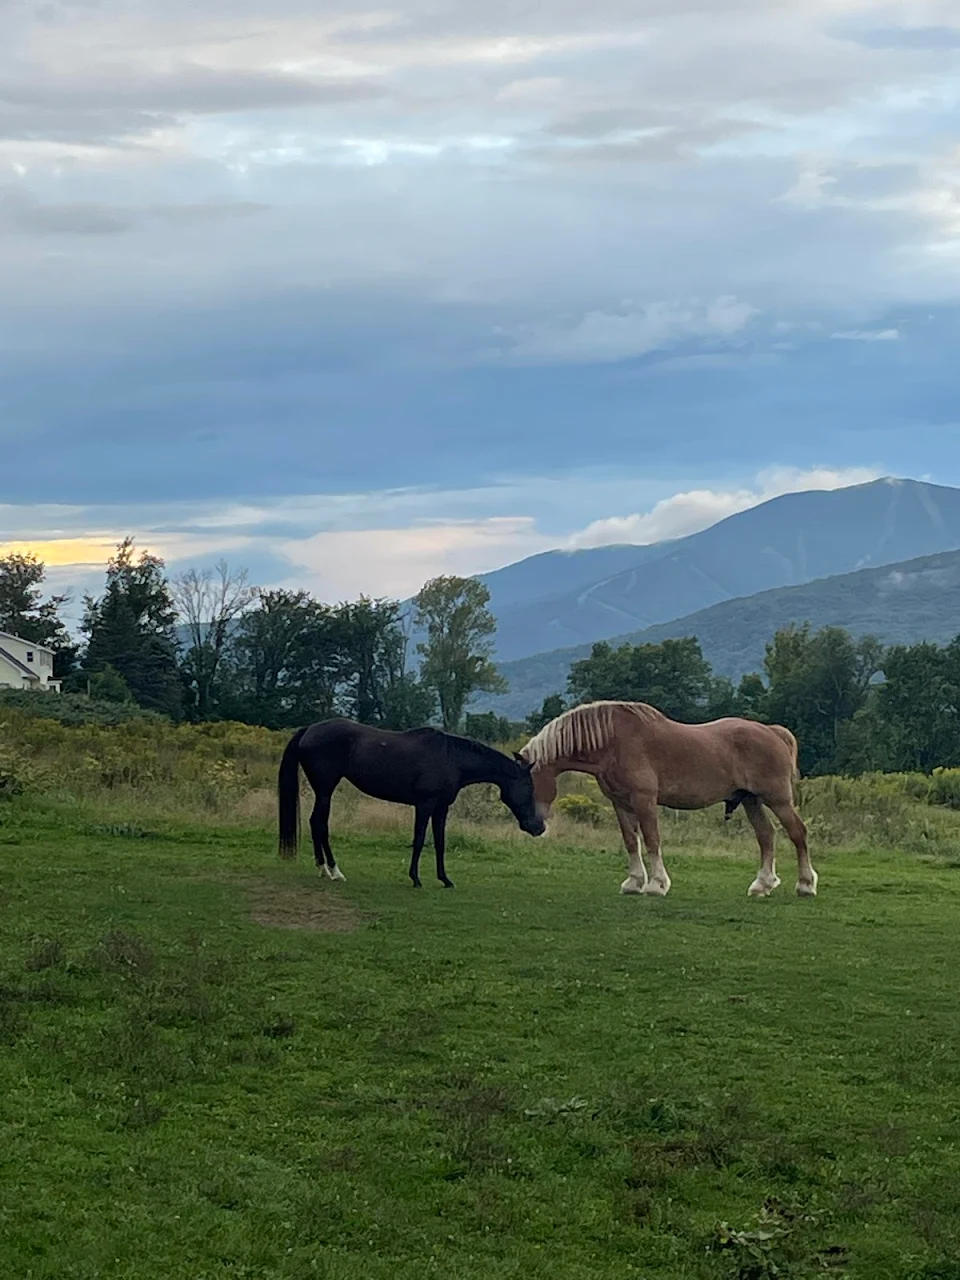 After a year without his brother, my mothers horse has a companion again. This is their first meeting.